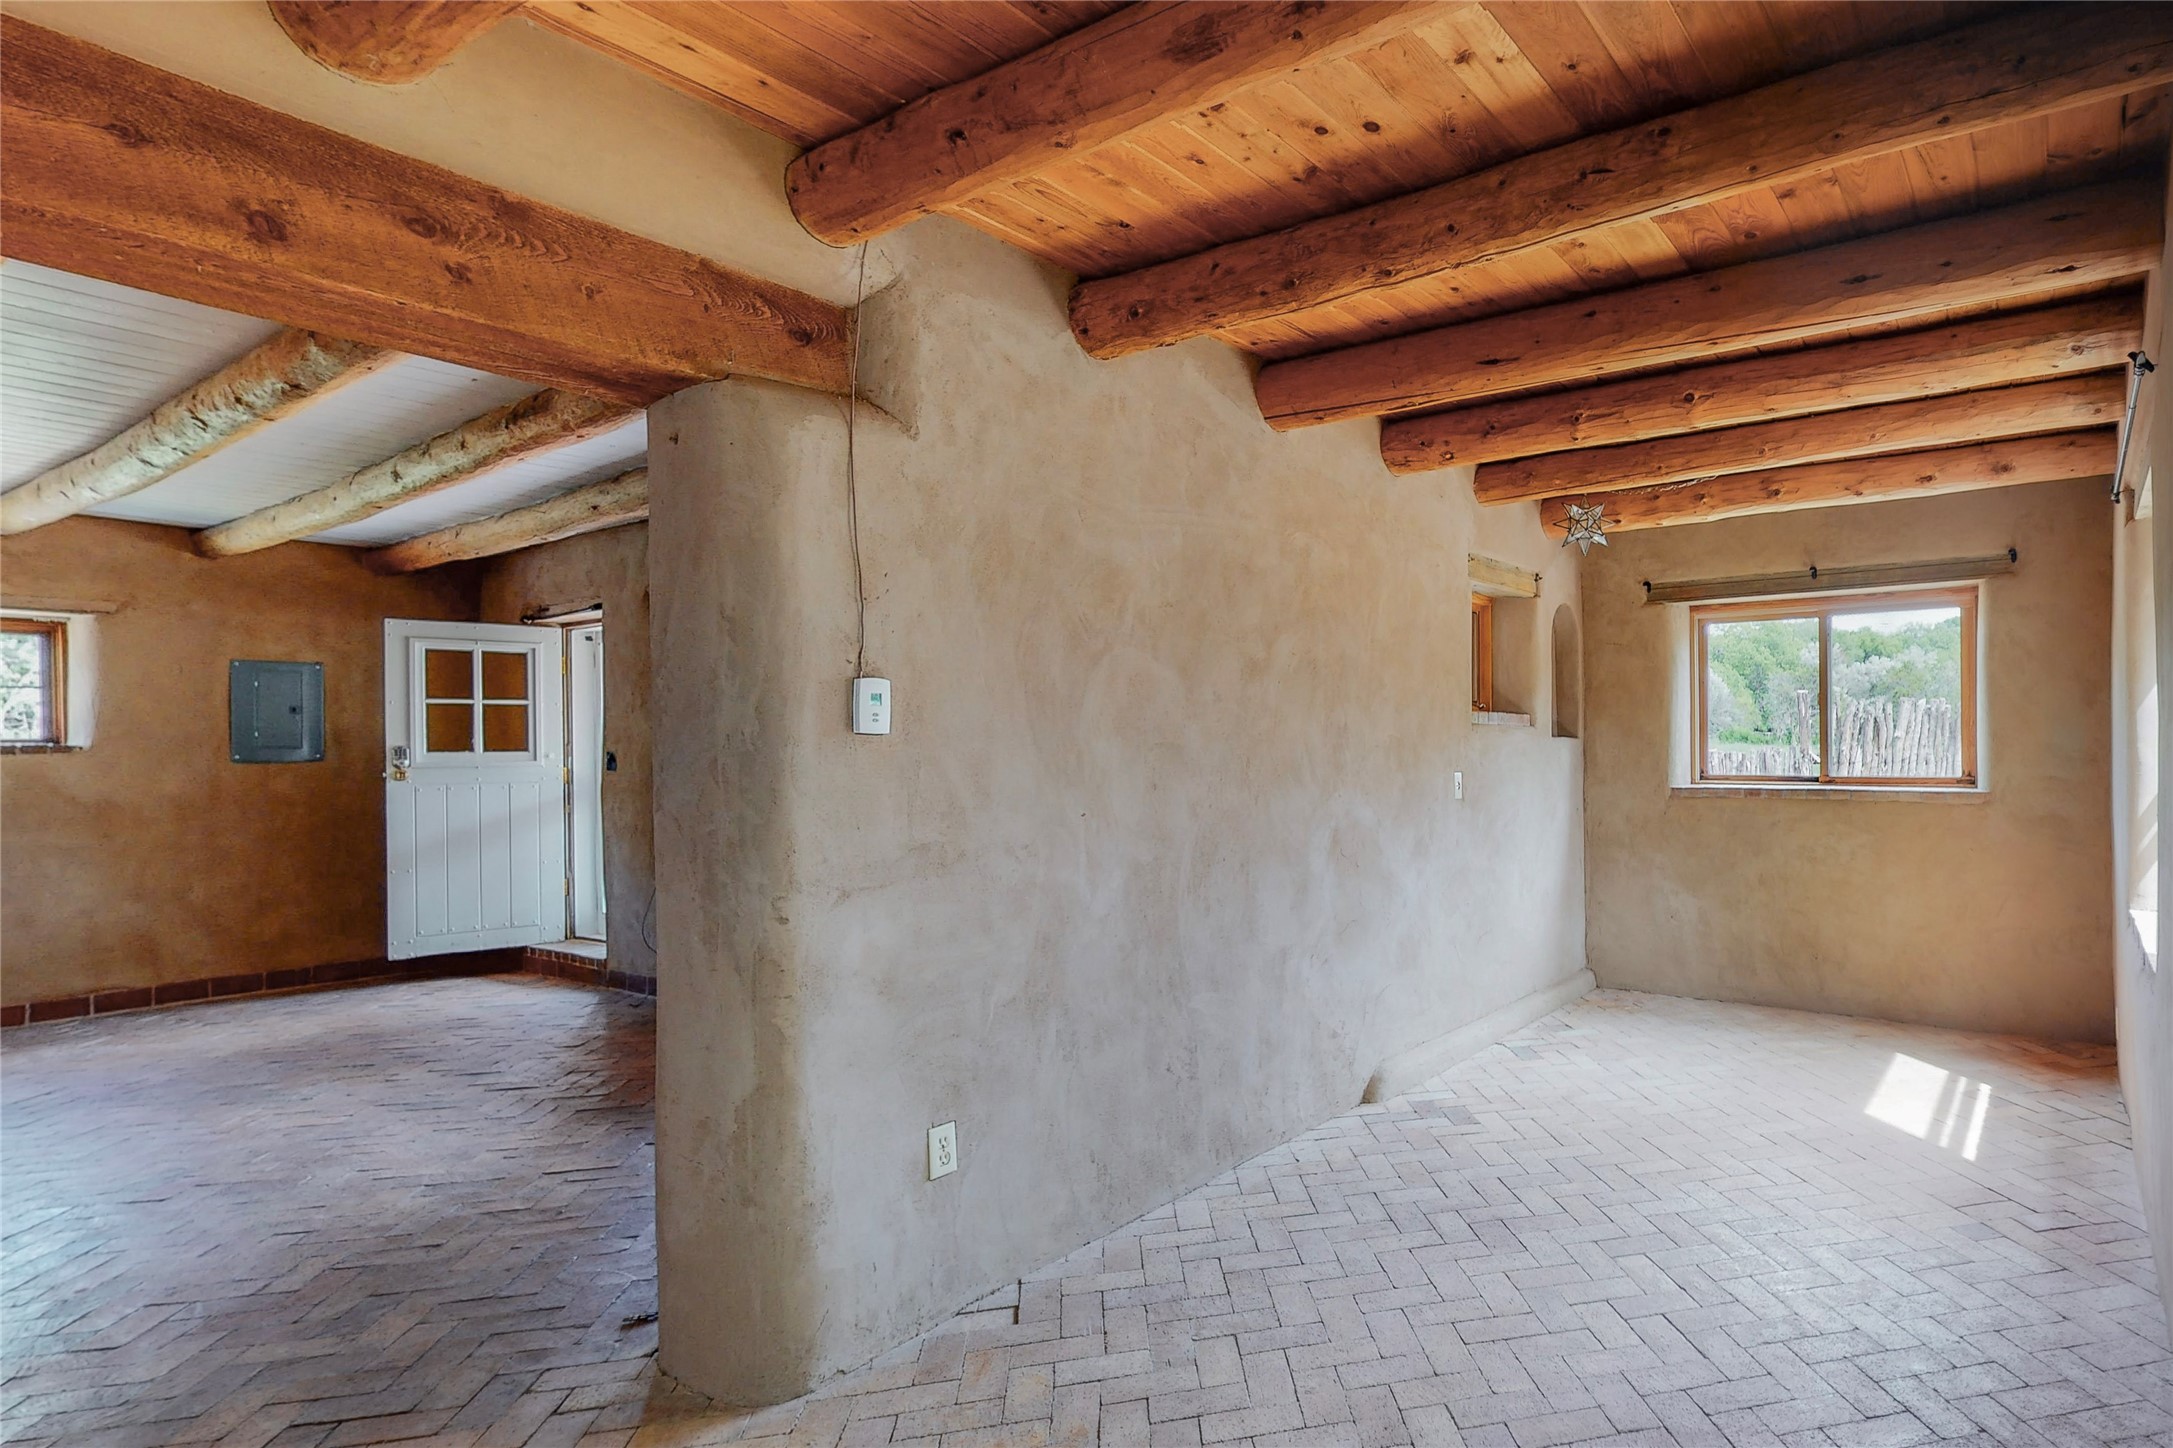 48 CR- 84G, Santa Fe, New Mexico 87506, 3 Bedrooms Bedrooms, ,3 BathroomsBathrooms,Residential,For Sale,48 CR- 84G,202231517